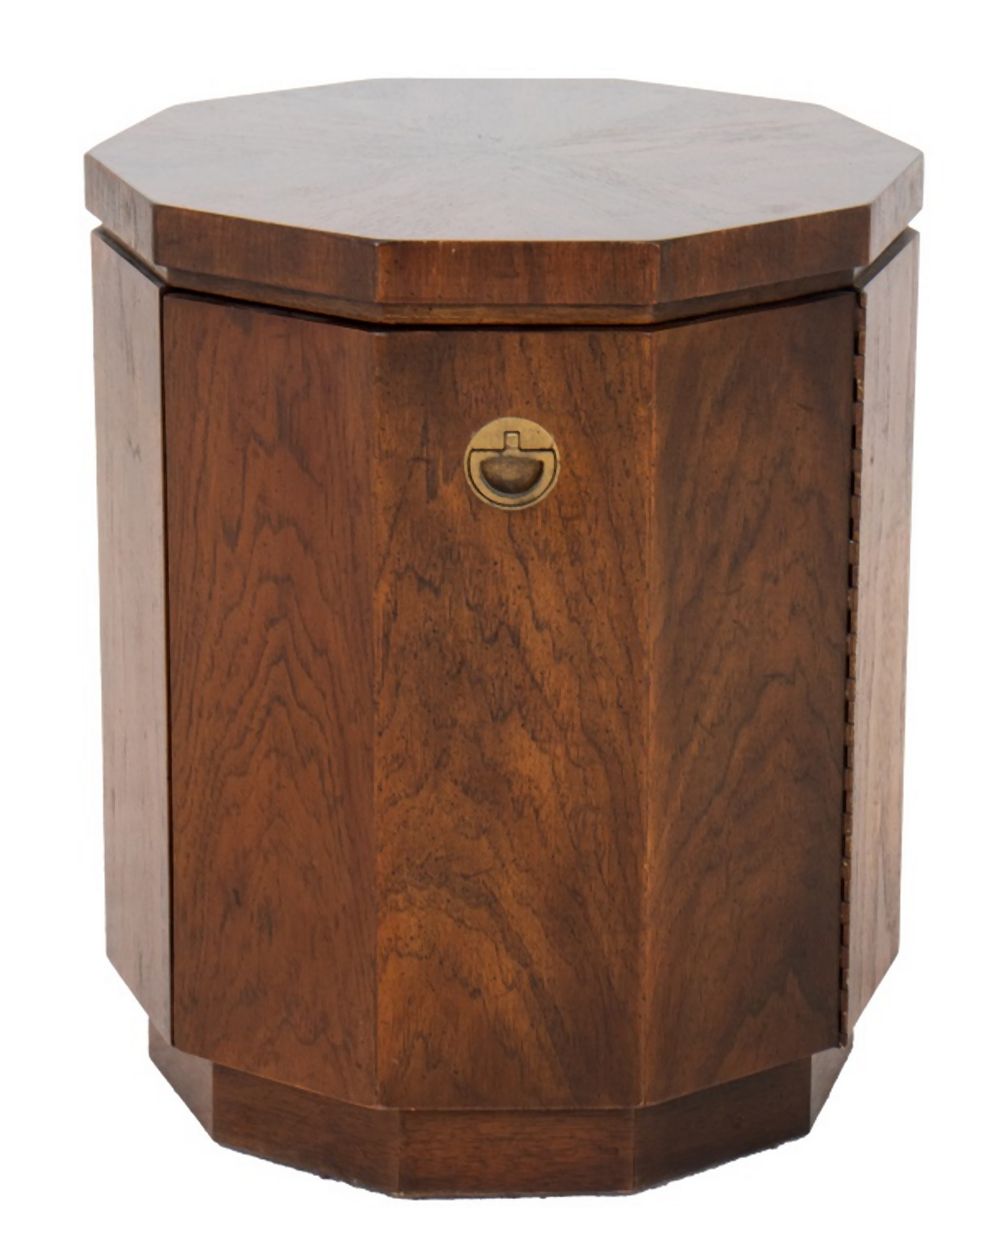 CAMPAIGN STYLE DREXEL ACCOLADE WALNUT